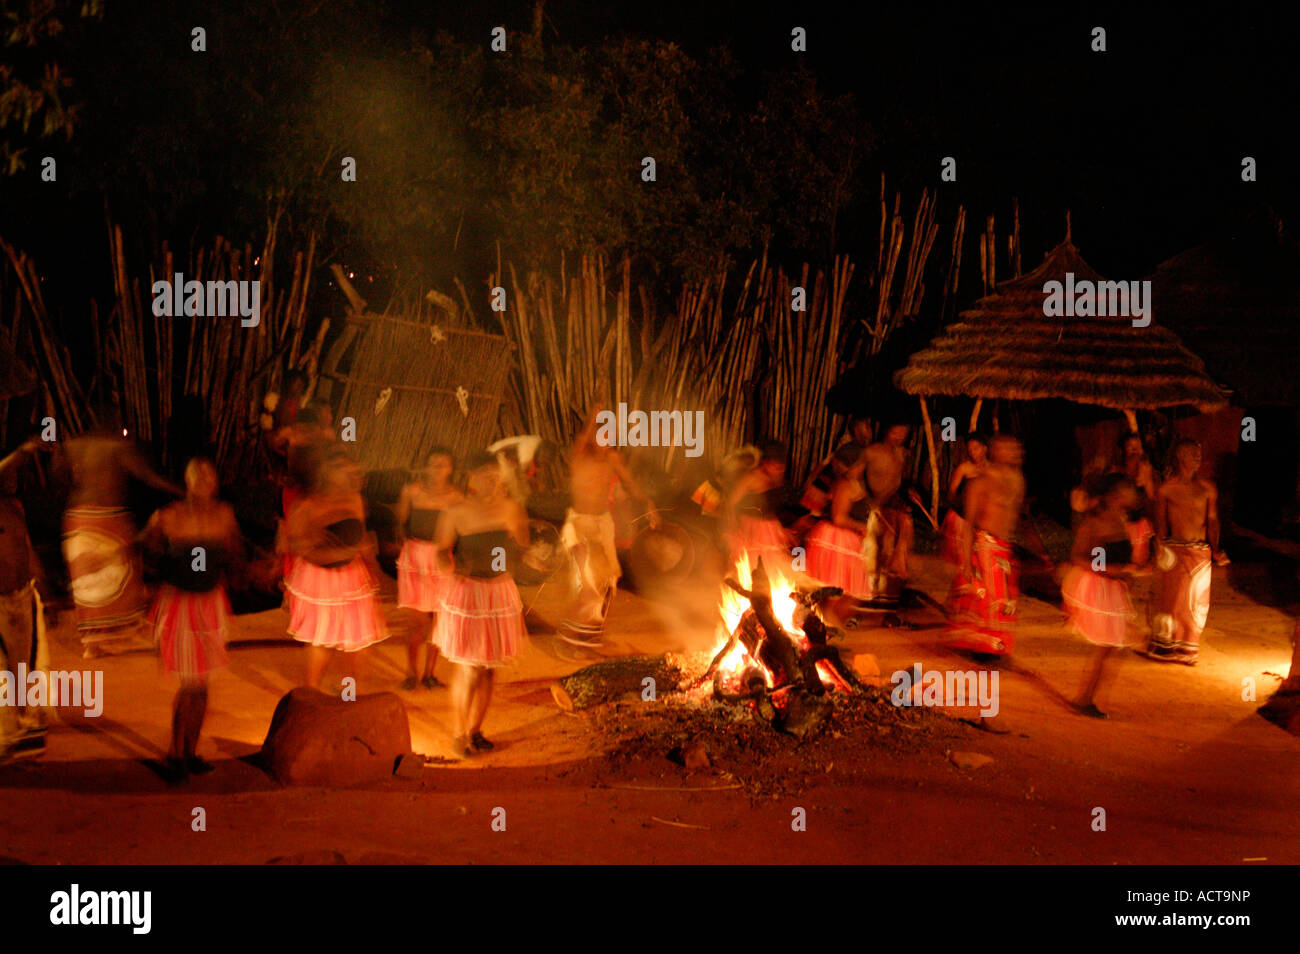 An evening dance show presented at the fireside in an outdoor boma at the Shangana cultural village Hazyview South Africa Stock Photo